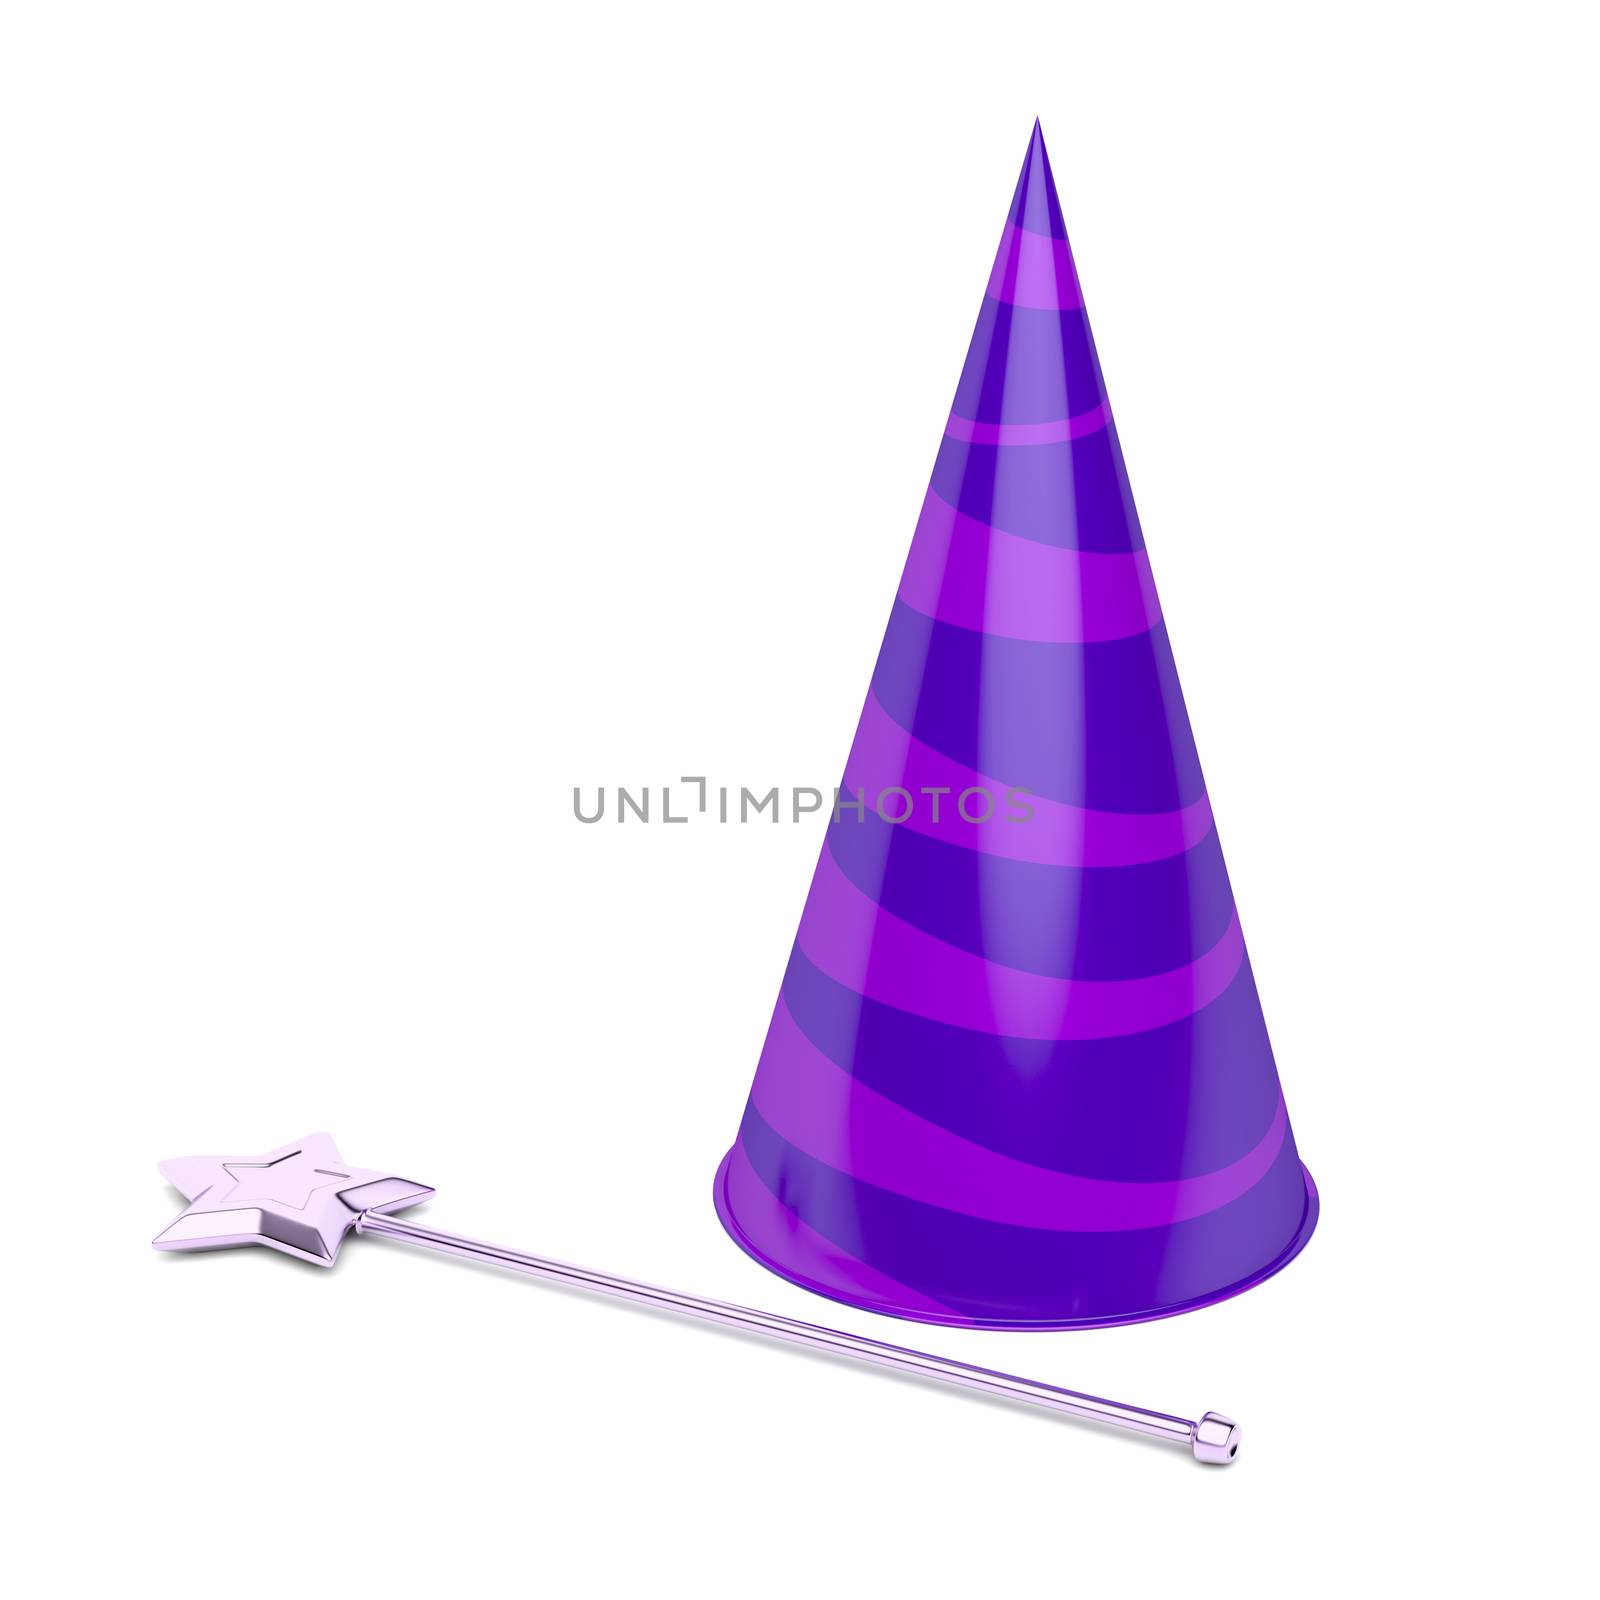 Cone hat and magic wand by magraphics